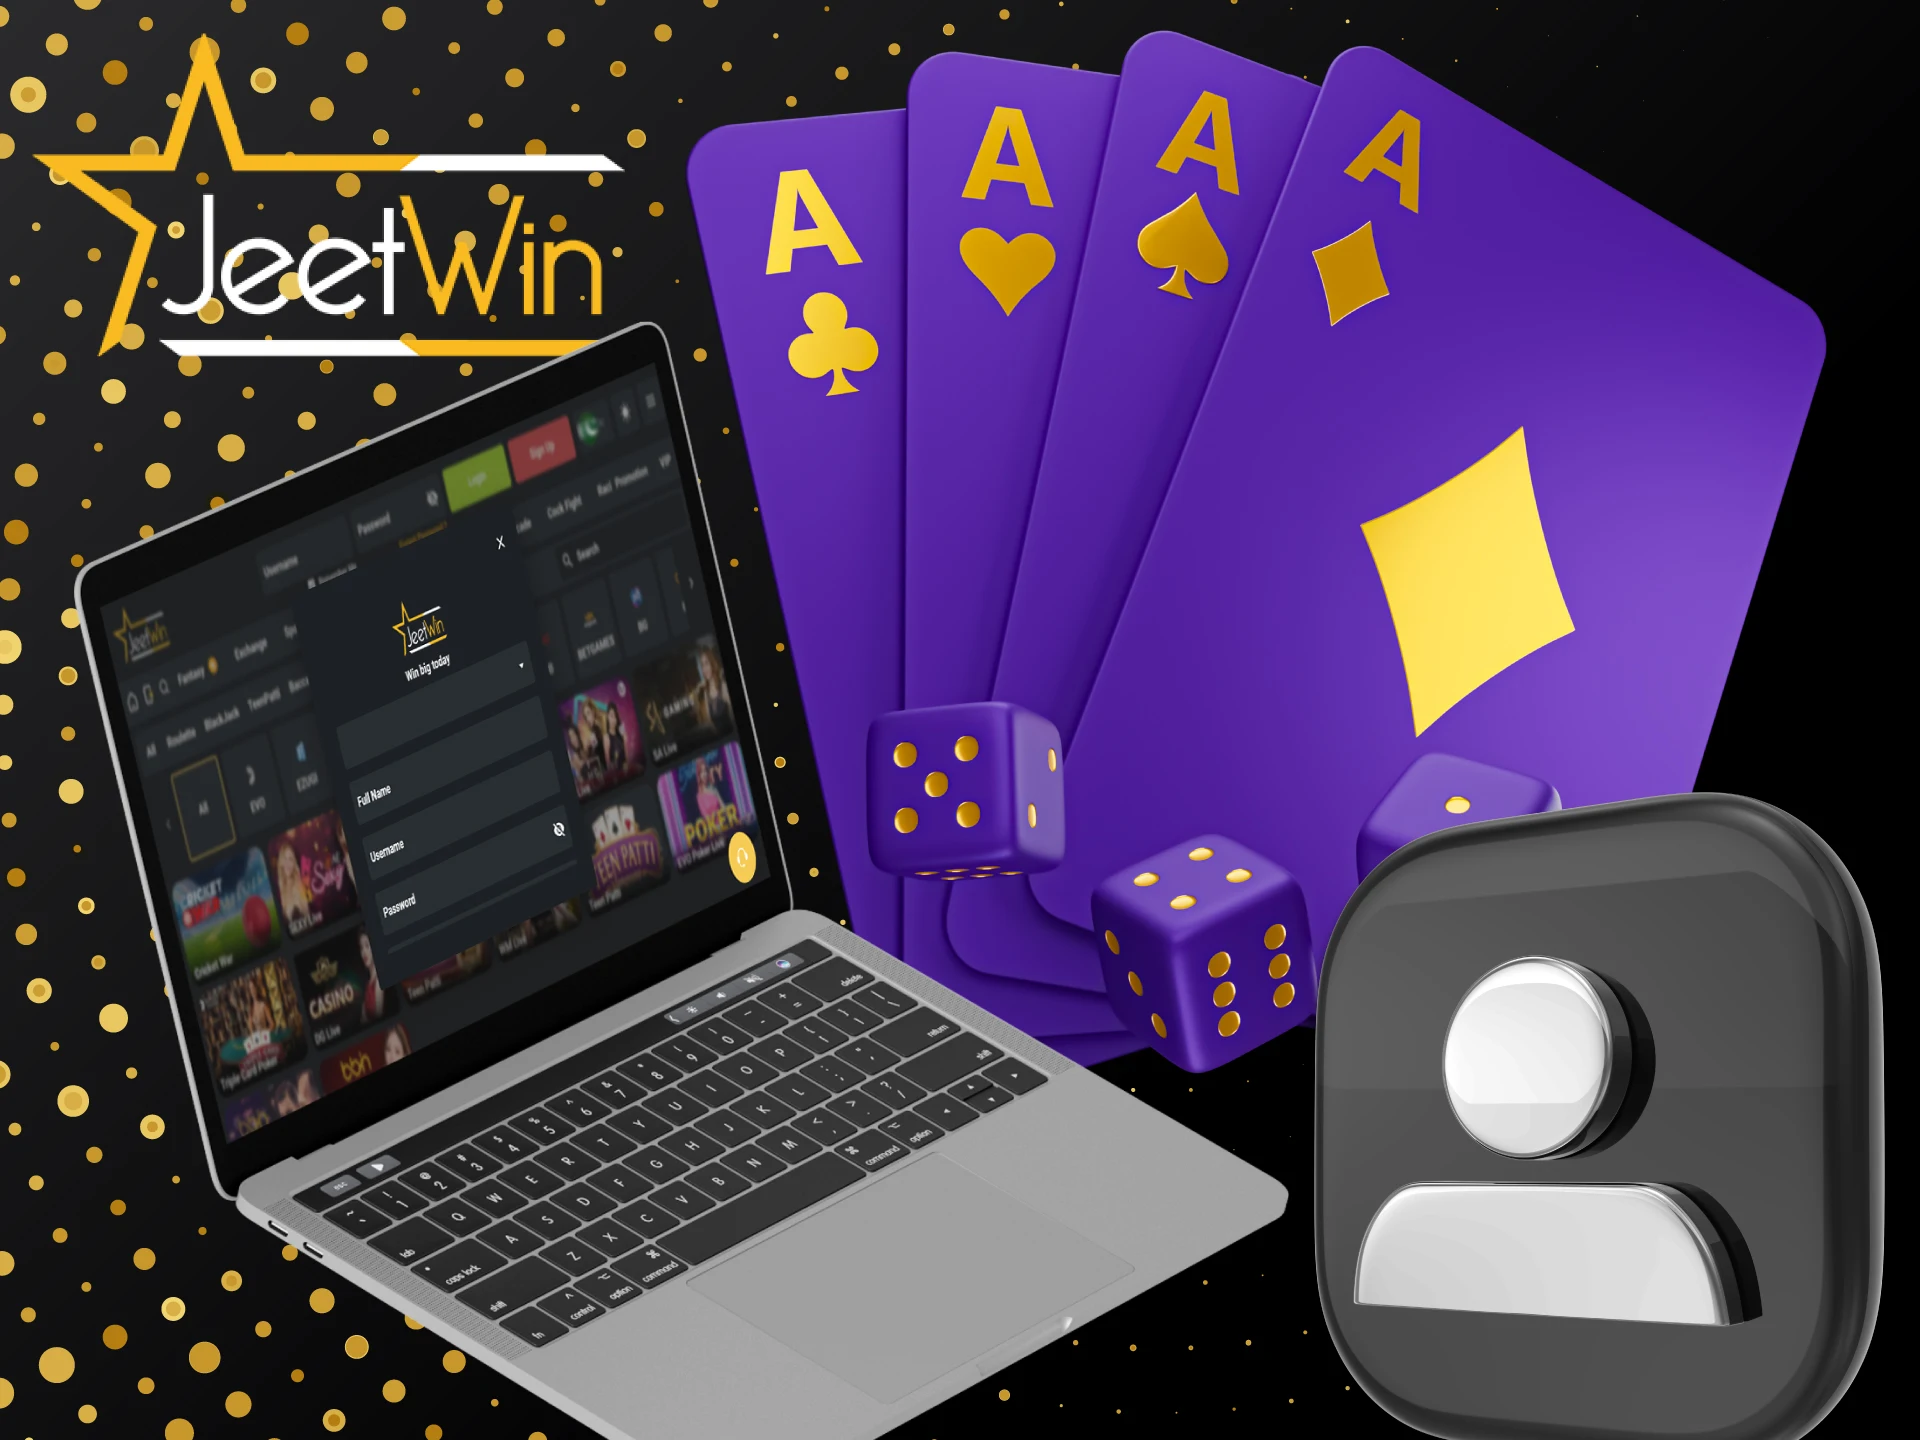 Learn how to get started playing poker at JeetWin.